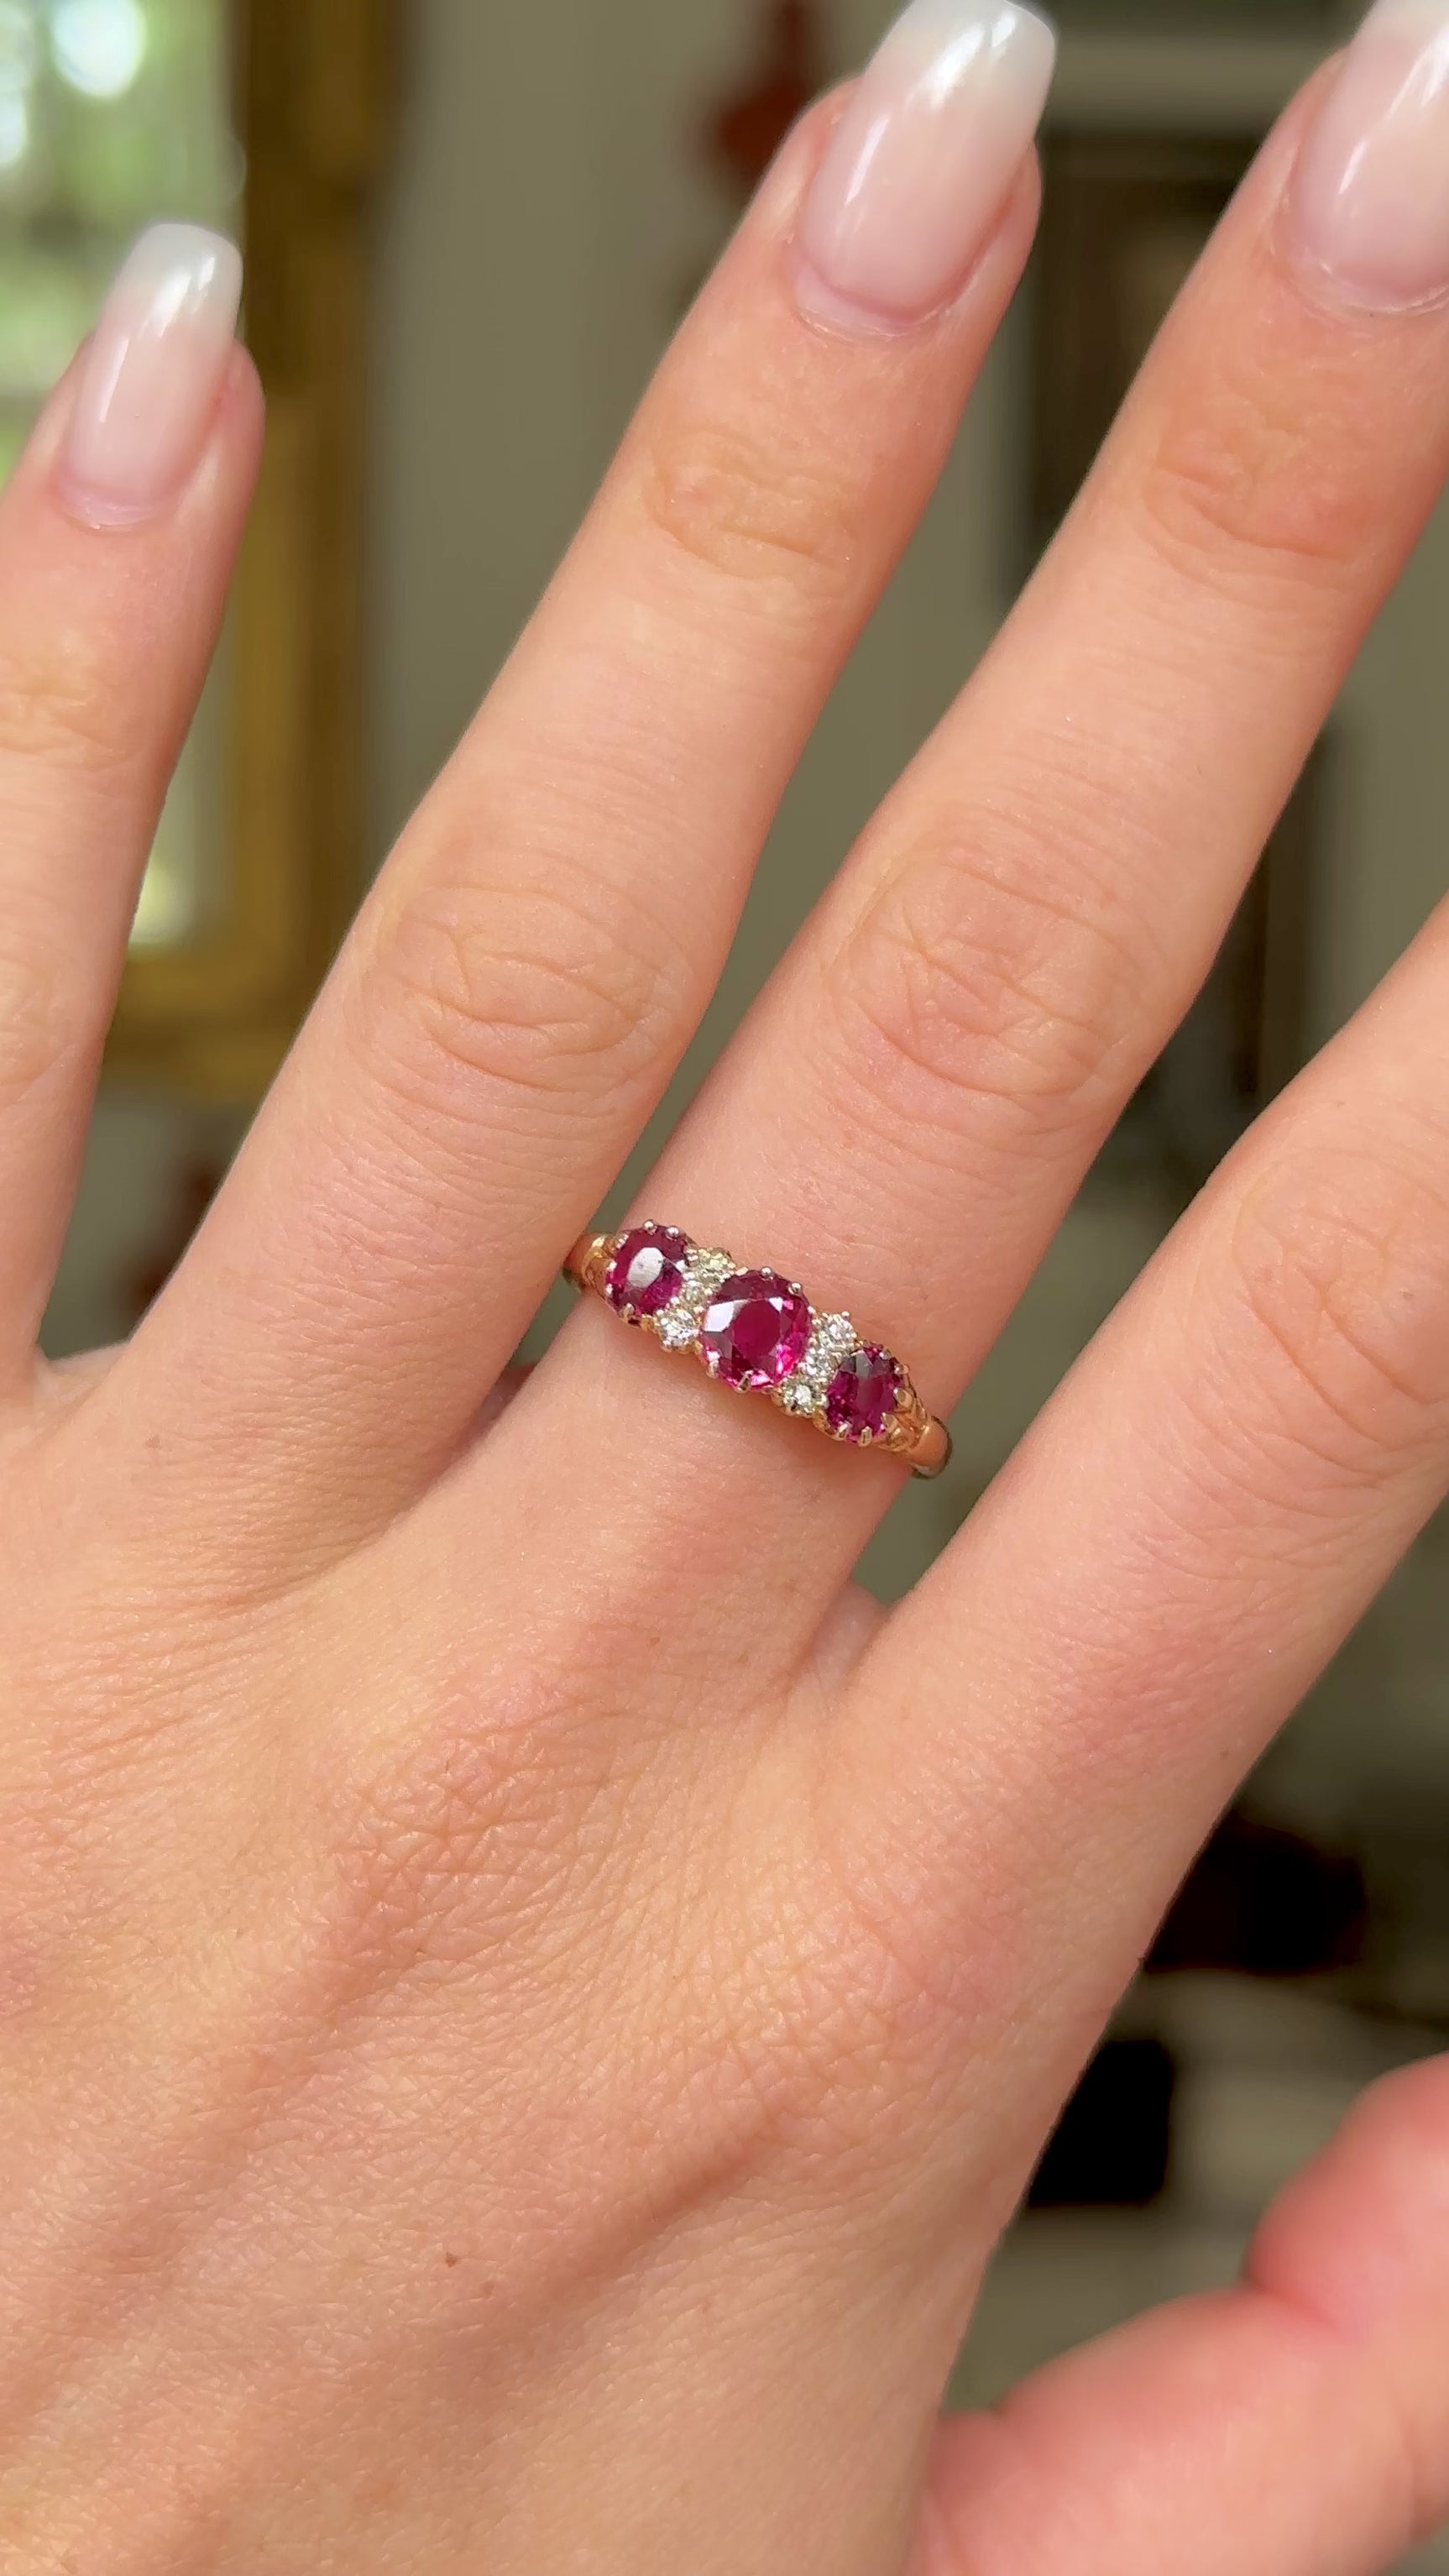 Victorian three-stone ruby and diamond engagement ring, worn on hand and rotated to give perspective.